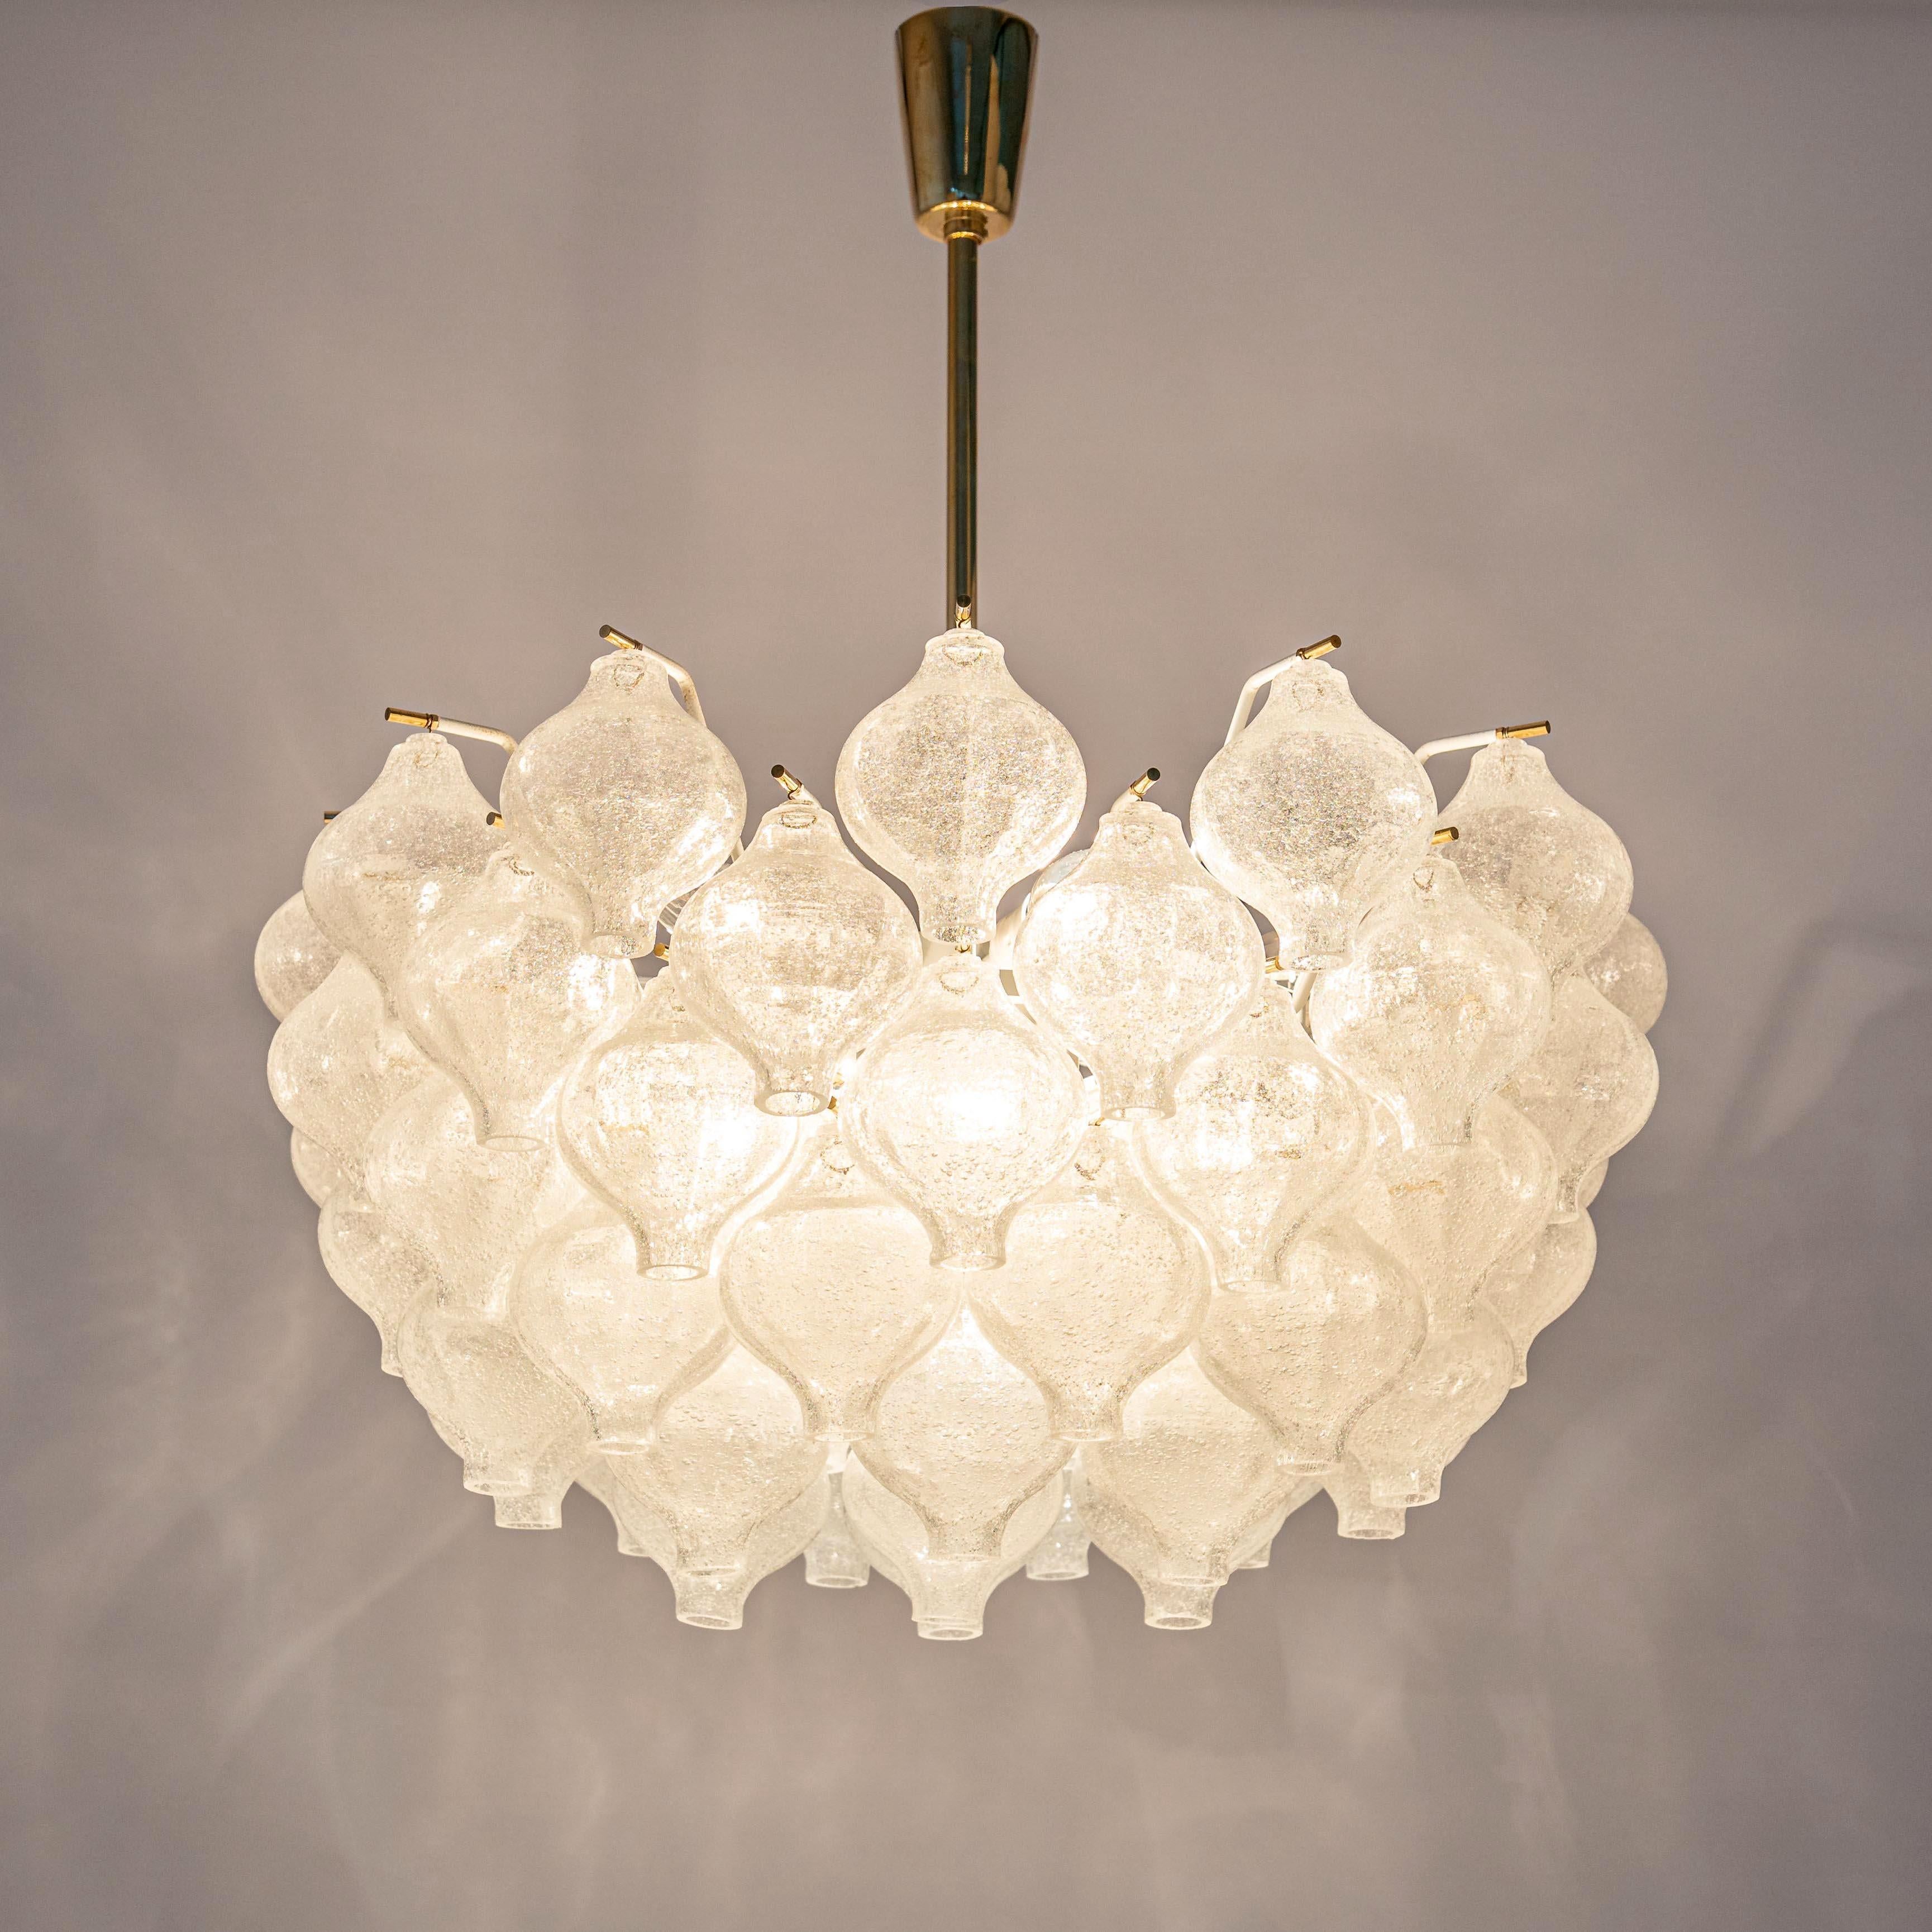 Metal One of Two Large Kalmar 'Tulipan' Chandeliers Pendant Lights, Glass Brass, 1970 For Sale